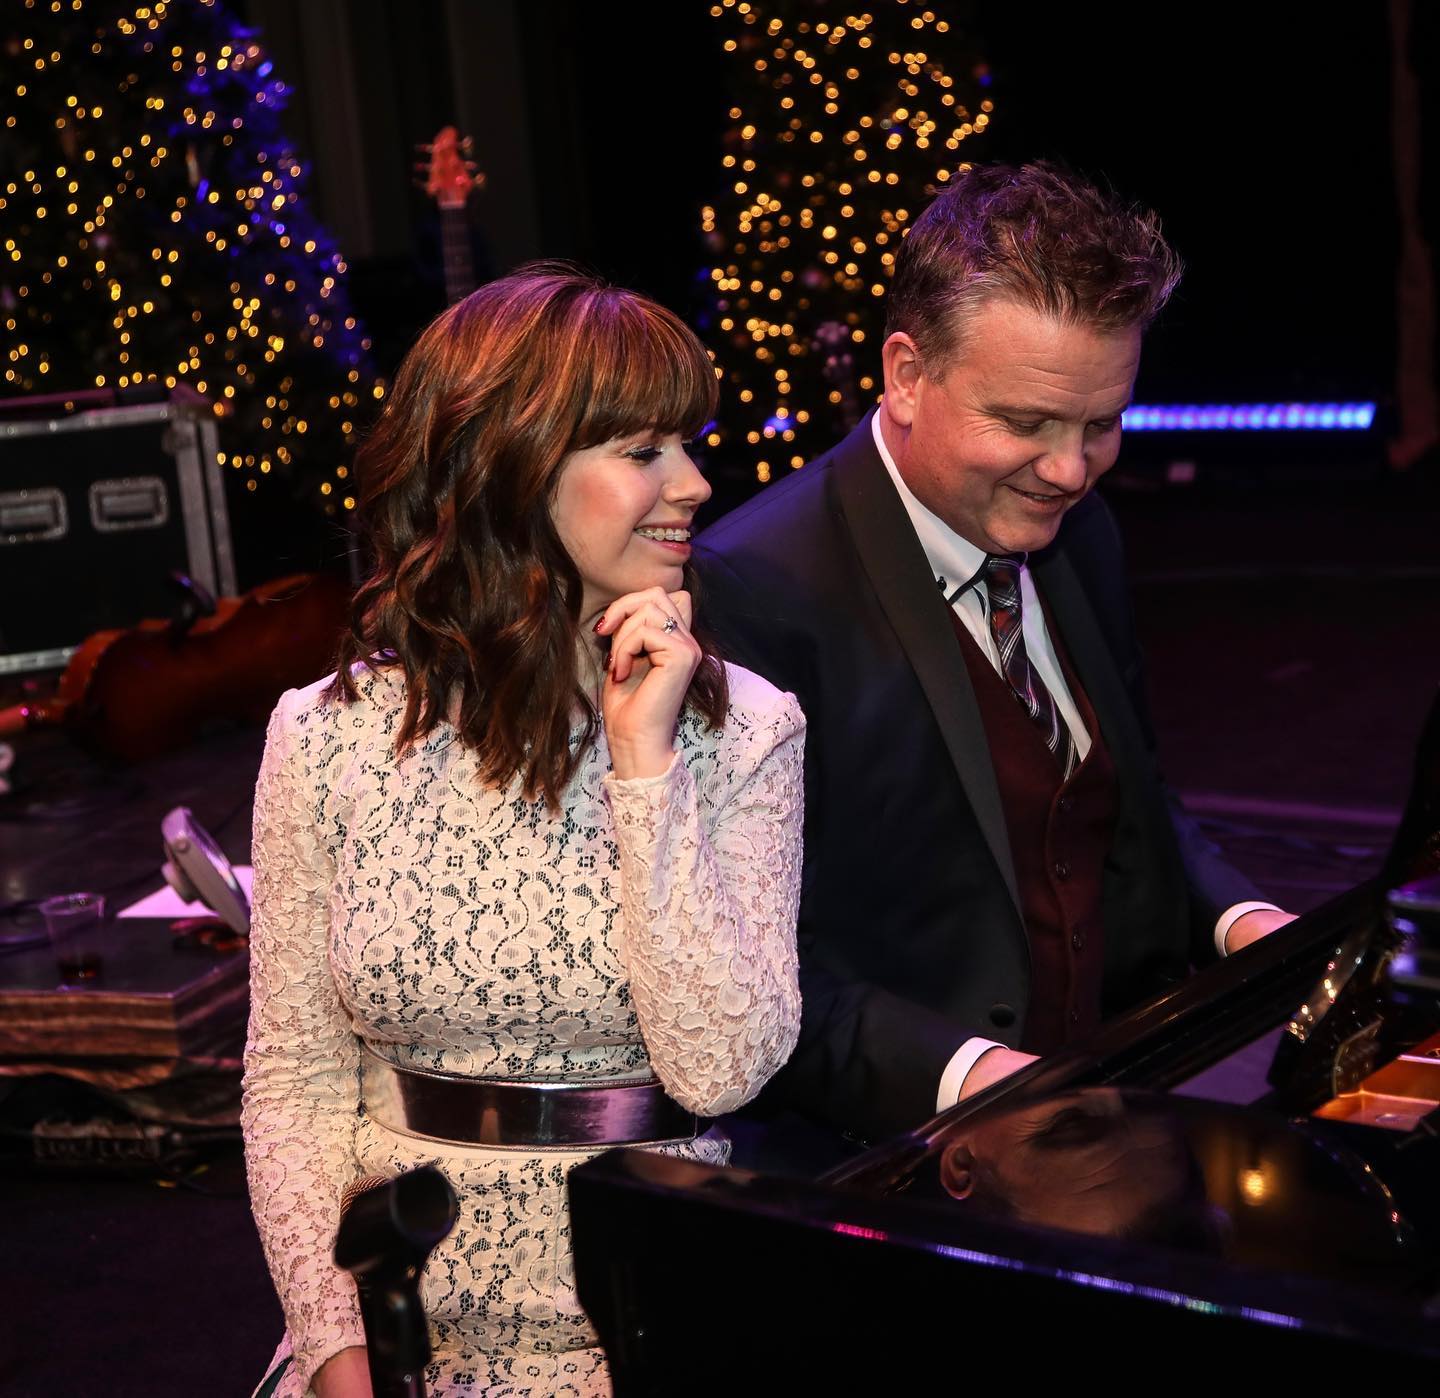 Keith and Kristyn Getty taking the stage together.